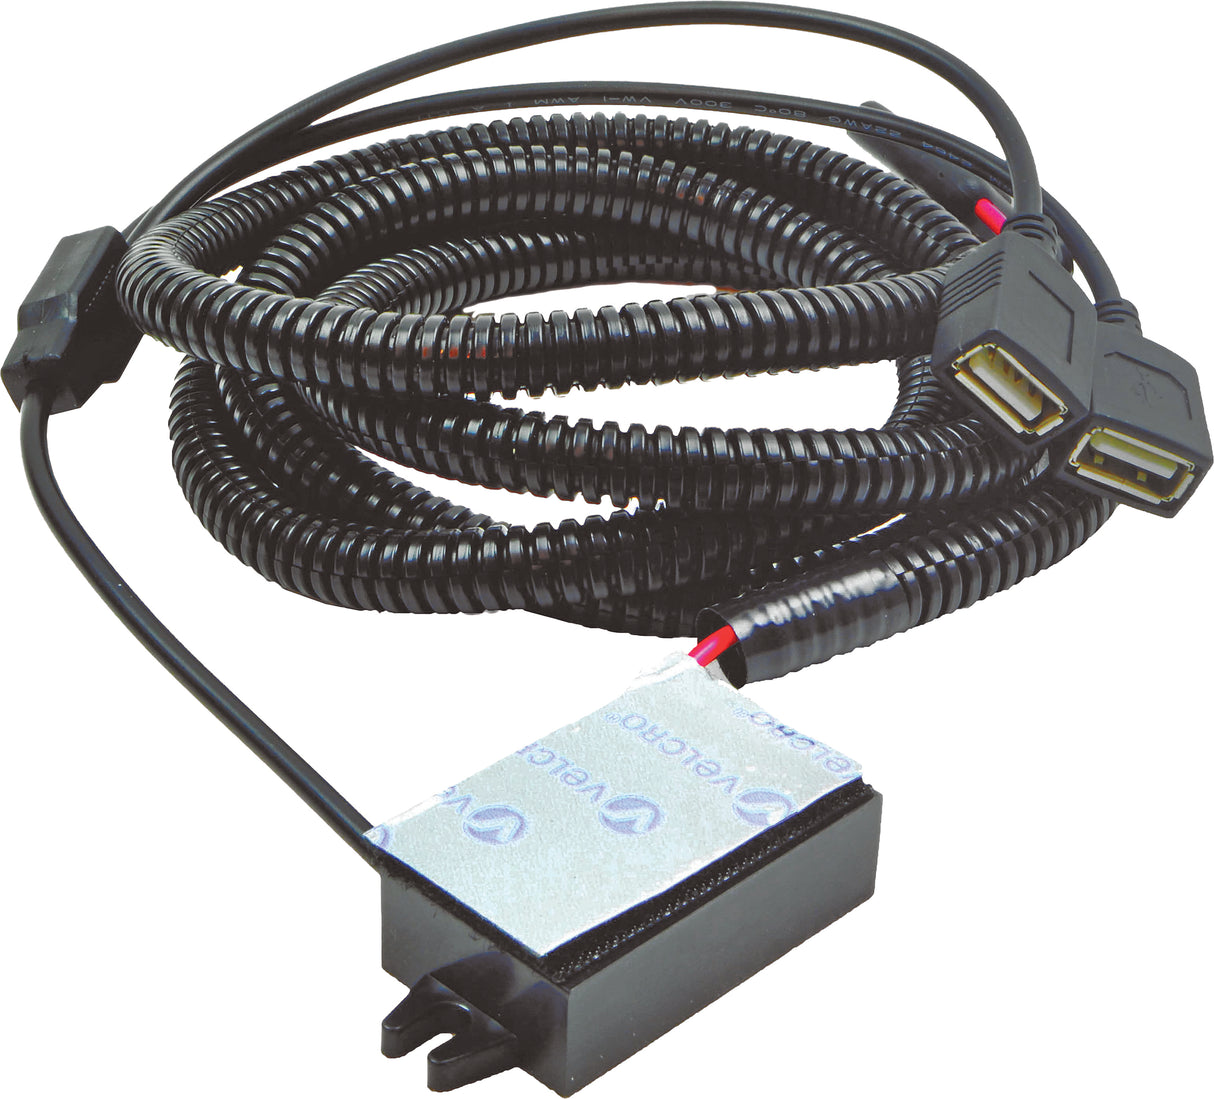 RSI Usb Power Cable A/C for Powersports